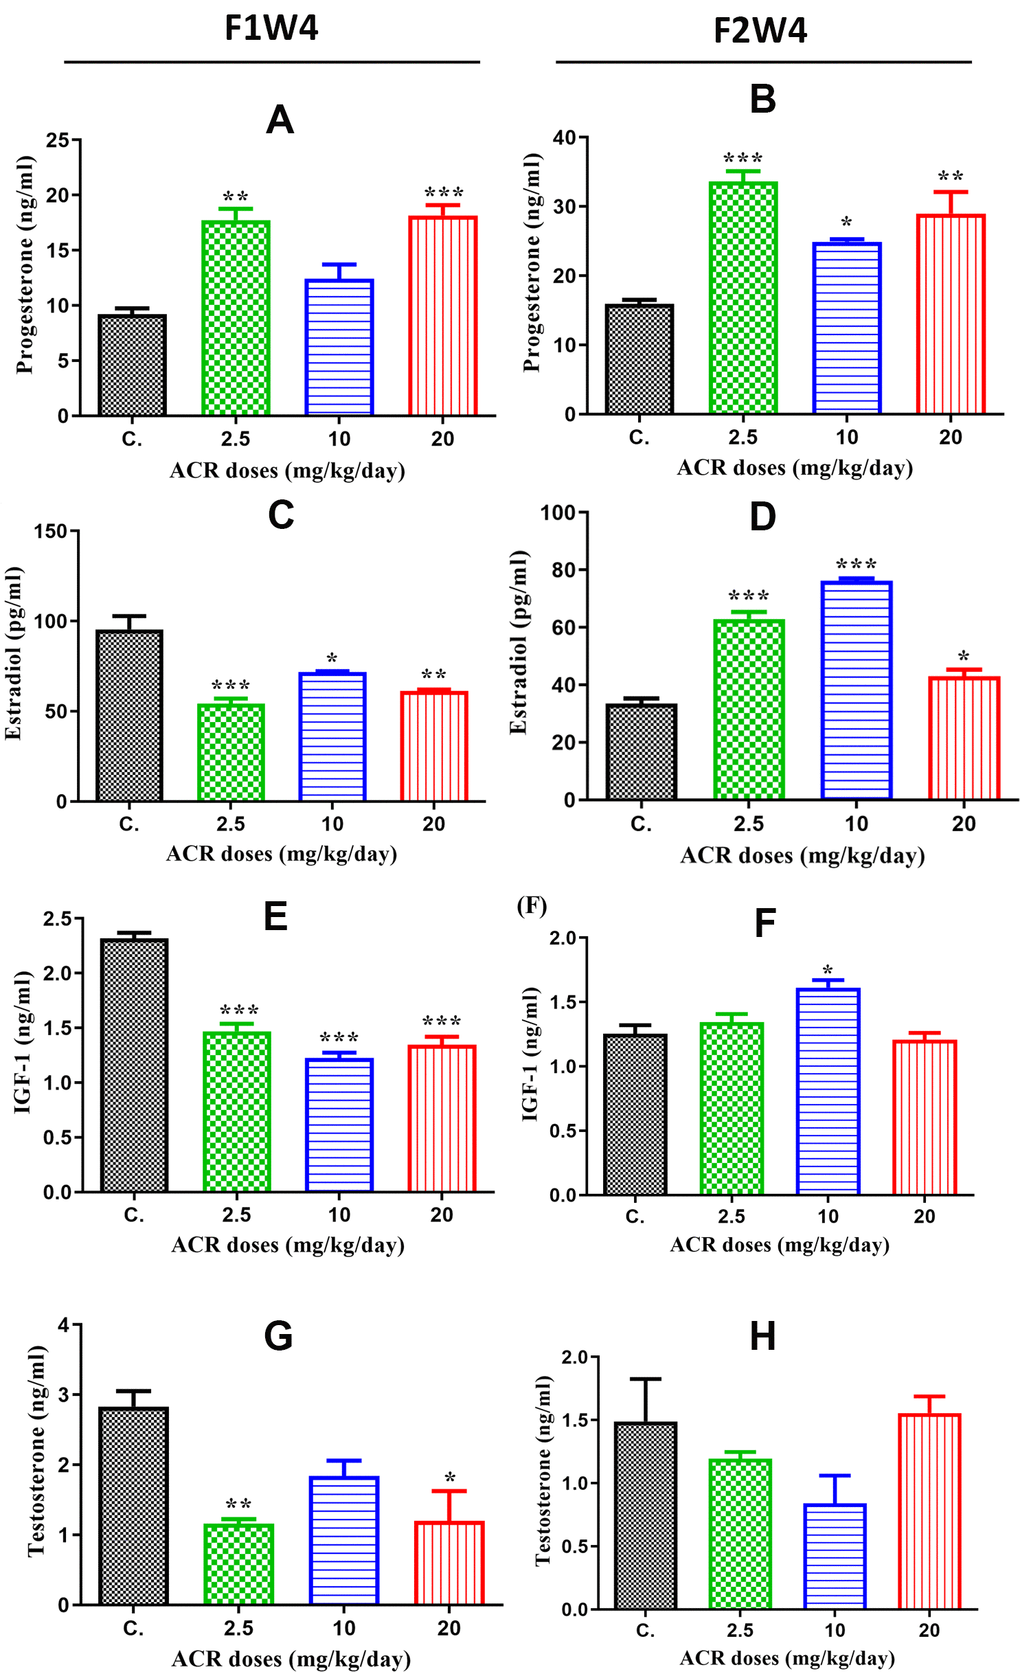 Hormone levels in the plasma of female offspring rats exposed to ACR during their fetal life compared to those in controls. (A) Plasma progesterone levels (ng/mL) in AF1 significantly increased in 2.5 and 20 mg/kg/day doses compared to the control group, while the increase in 10 mg/kg/day dose was nonsignificant. (B) Plasma progesterone levels (ng/mL) in AF2 were significantly elevated in all ACR dose (2.5, 10, and 20 mg/kg/day) groups compared to that in the control group CF2. (C) Plasma estradiol levels in AF1 groups recorded a high significant decrease in all doses of ACR. (D) A Plasma estradiol levels significantly increased in all AF2 treated groups compared to the control group CF2. (E) Plasma IGF-1 levels significantly decreased in all treated groups of AF1 compared to the control group. (F) We found a significant increase in plasma IGF-1 levels in the AF2 group treated with 10 mg/kg/day, whereas no significant variation was found in 2.5 and 20 mg/kg/day groups compared to the control group CF2. (G) Plasma testosterone levels in AF1 groups show a significant decline in 2.5 mg/kg/day and 20 mg/kg/day, whereas no significant variation was noted in 10 mg/kg/day. (H) No significant changes were observed in plasma testosterone levels in all AF2 treated groups compared to the control group CF2.